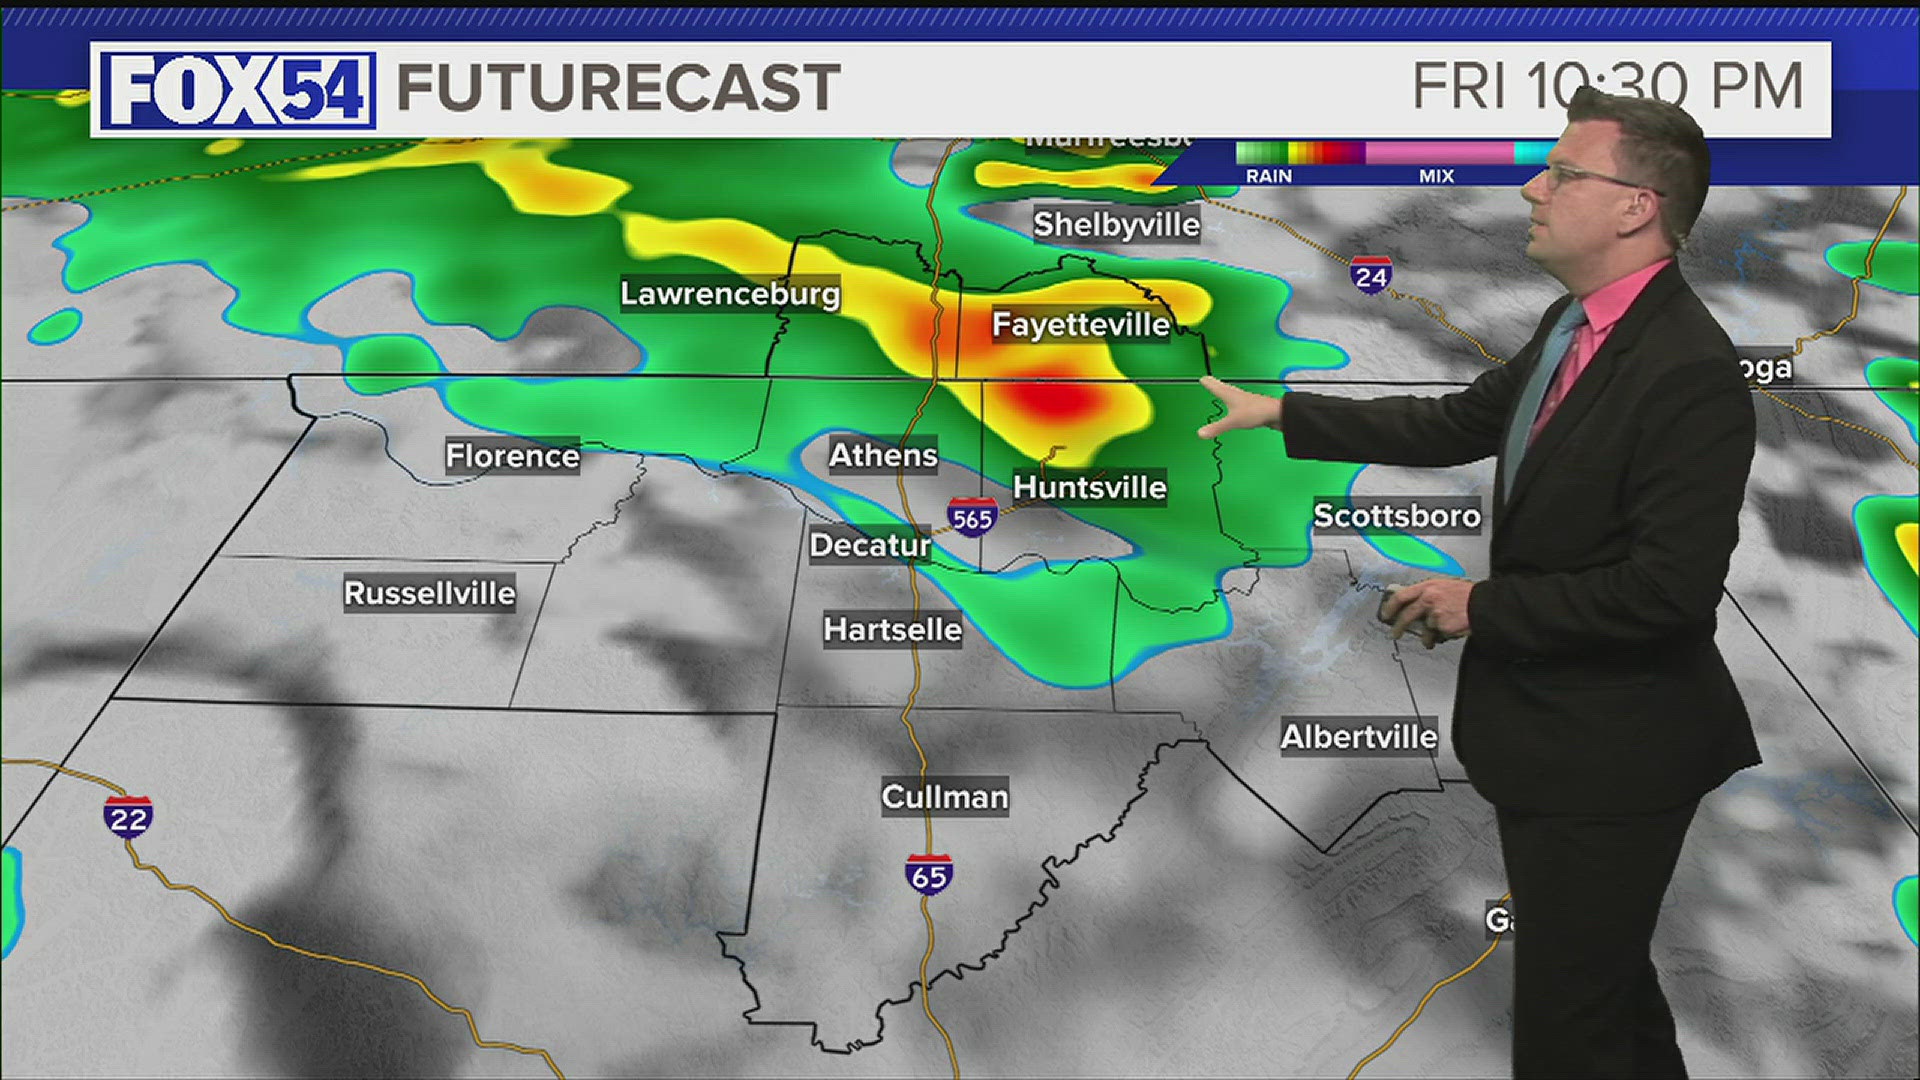 Showers and thunderstorms are in the forecast through the end of the weekend.